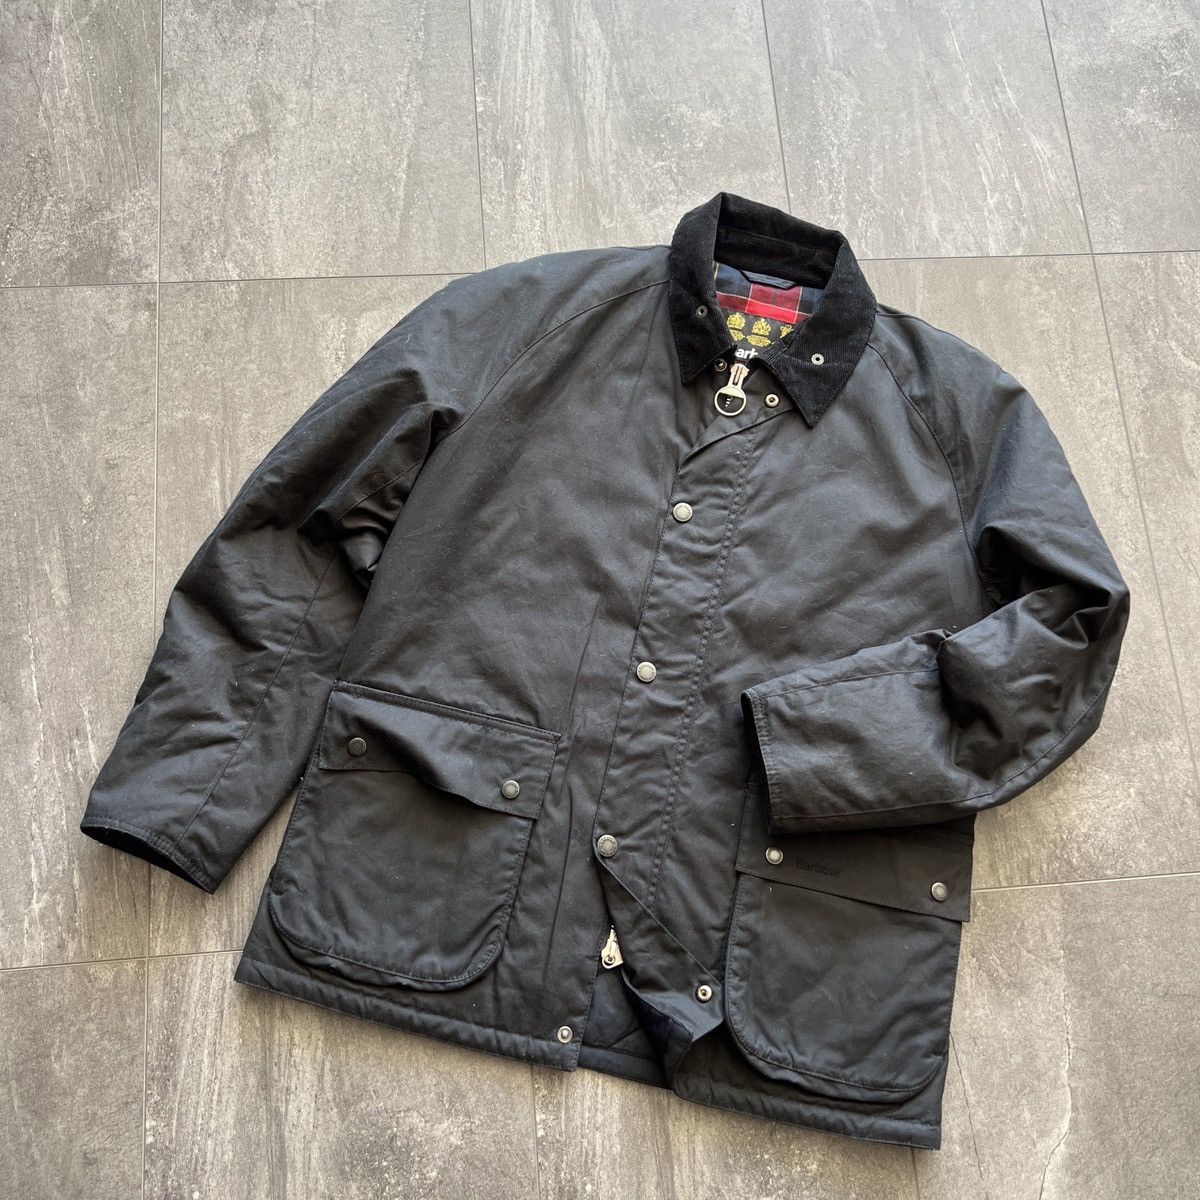 Barbour BARBOUR HORTO Waxed Navy Blue Jacket Wax | Grailed